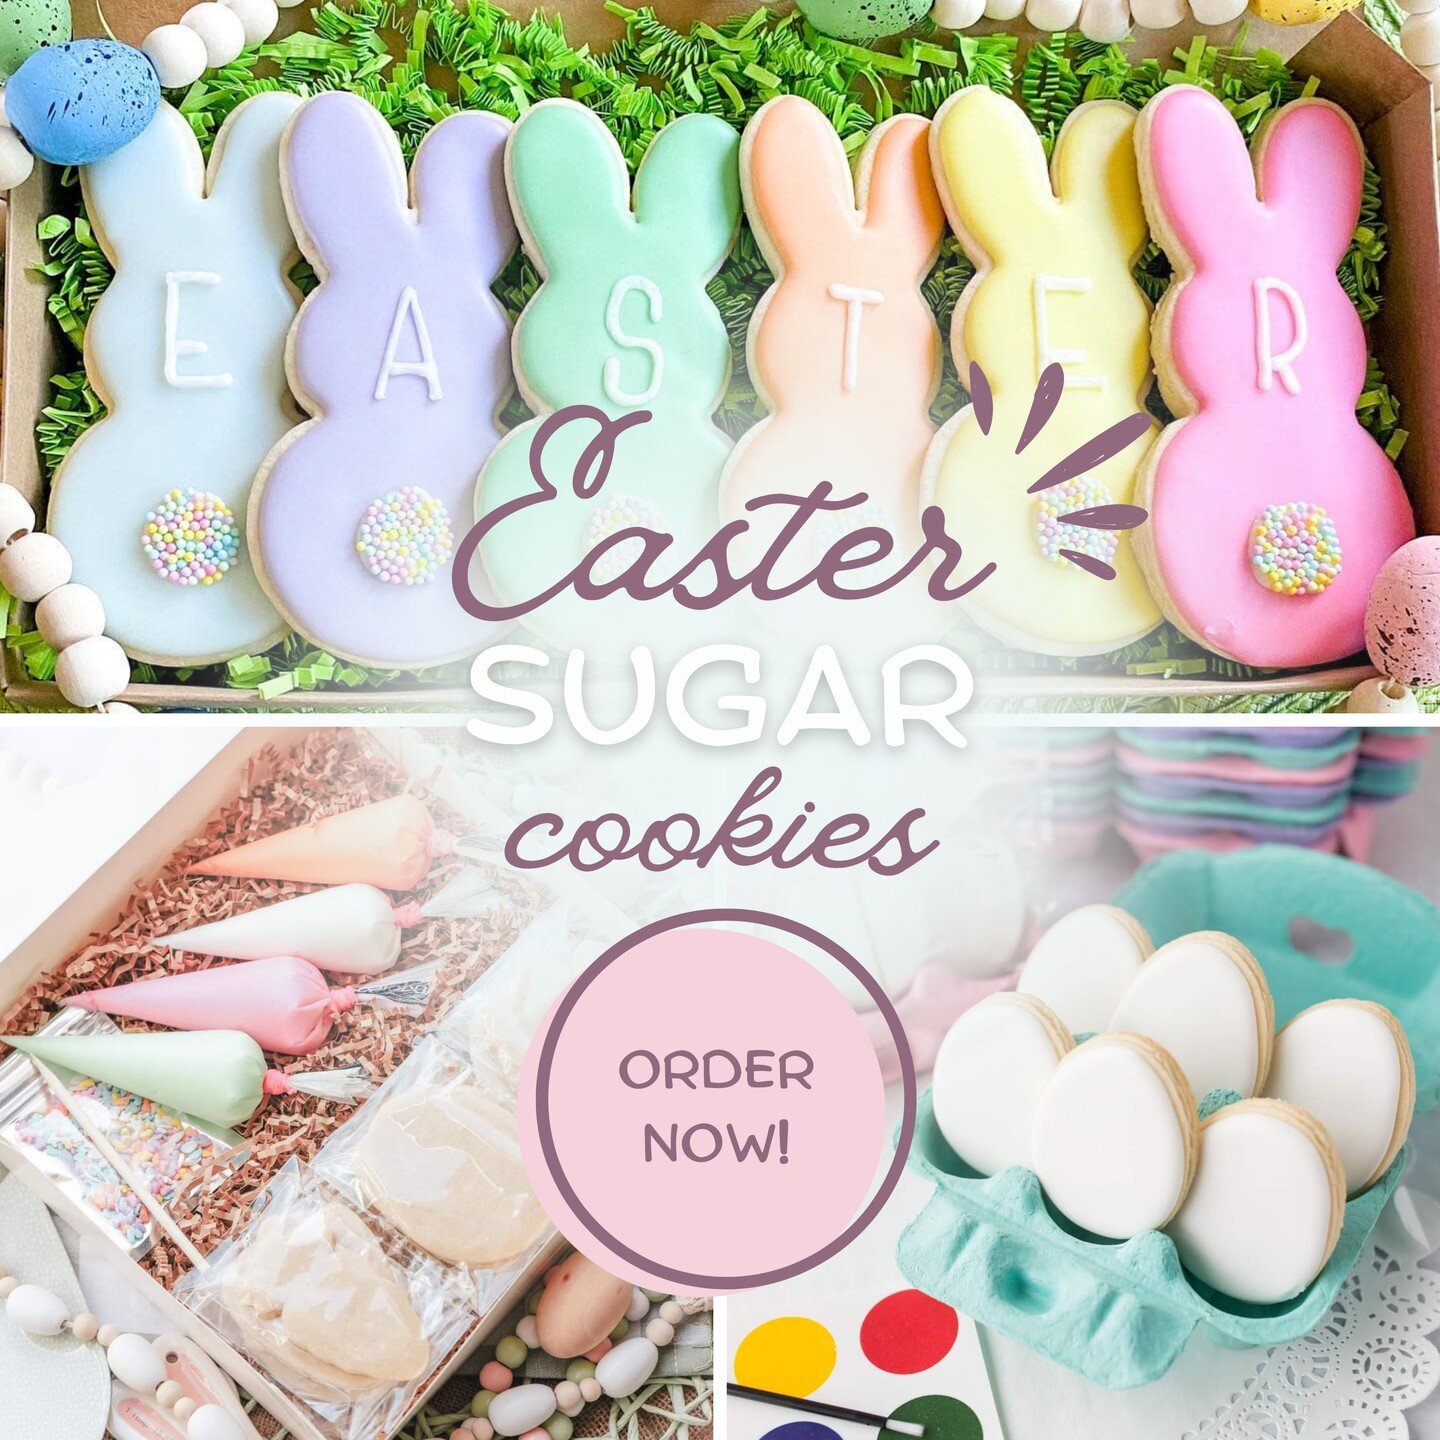 🐰🌷 Hop into Easter with Olympic Mountain Goodies! 🌟 Don't miss our exclusive presale on Easter cookies&mdash;perfect for adding some sweetness to your holiday celebrations! 🍪
✨ Get your hands on our adorable set of bunnies, each delicately adorne